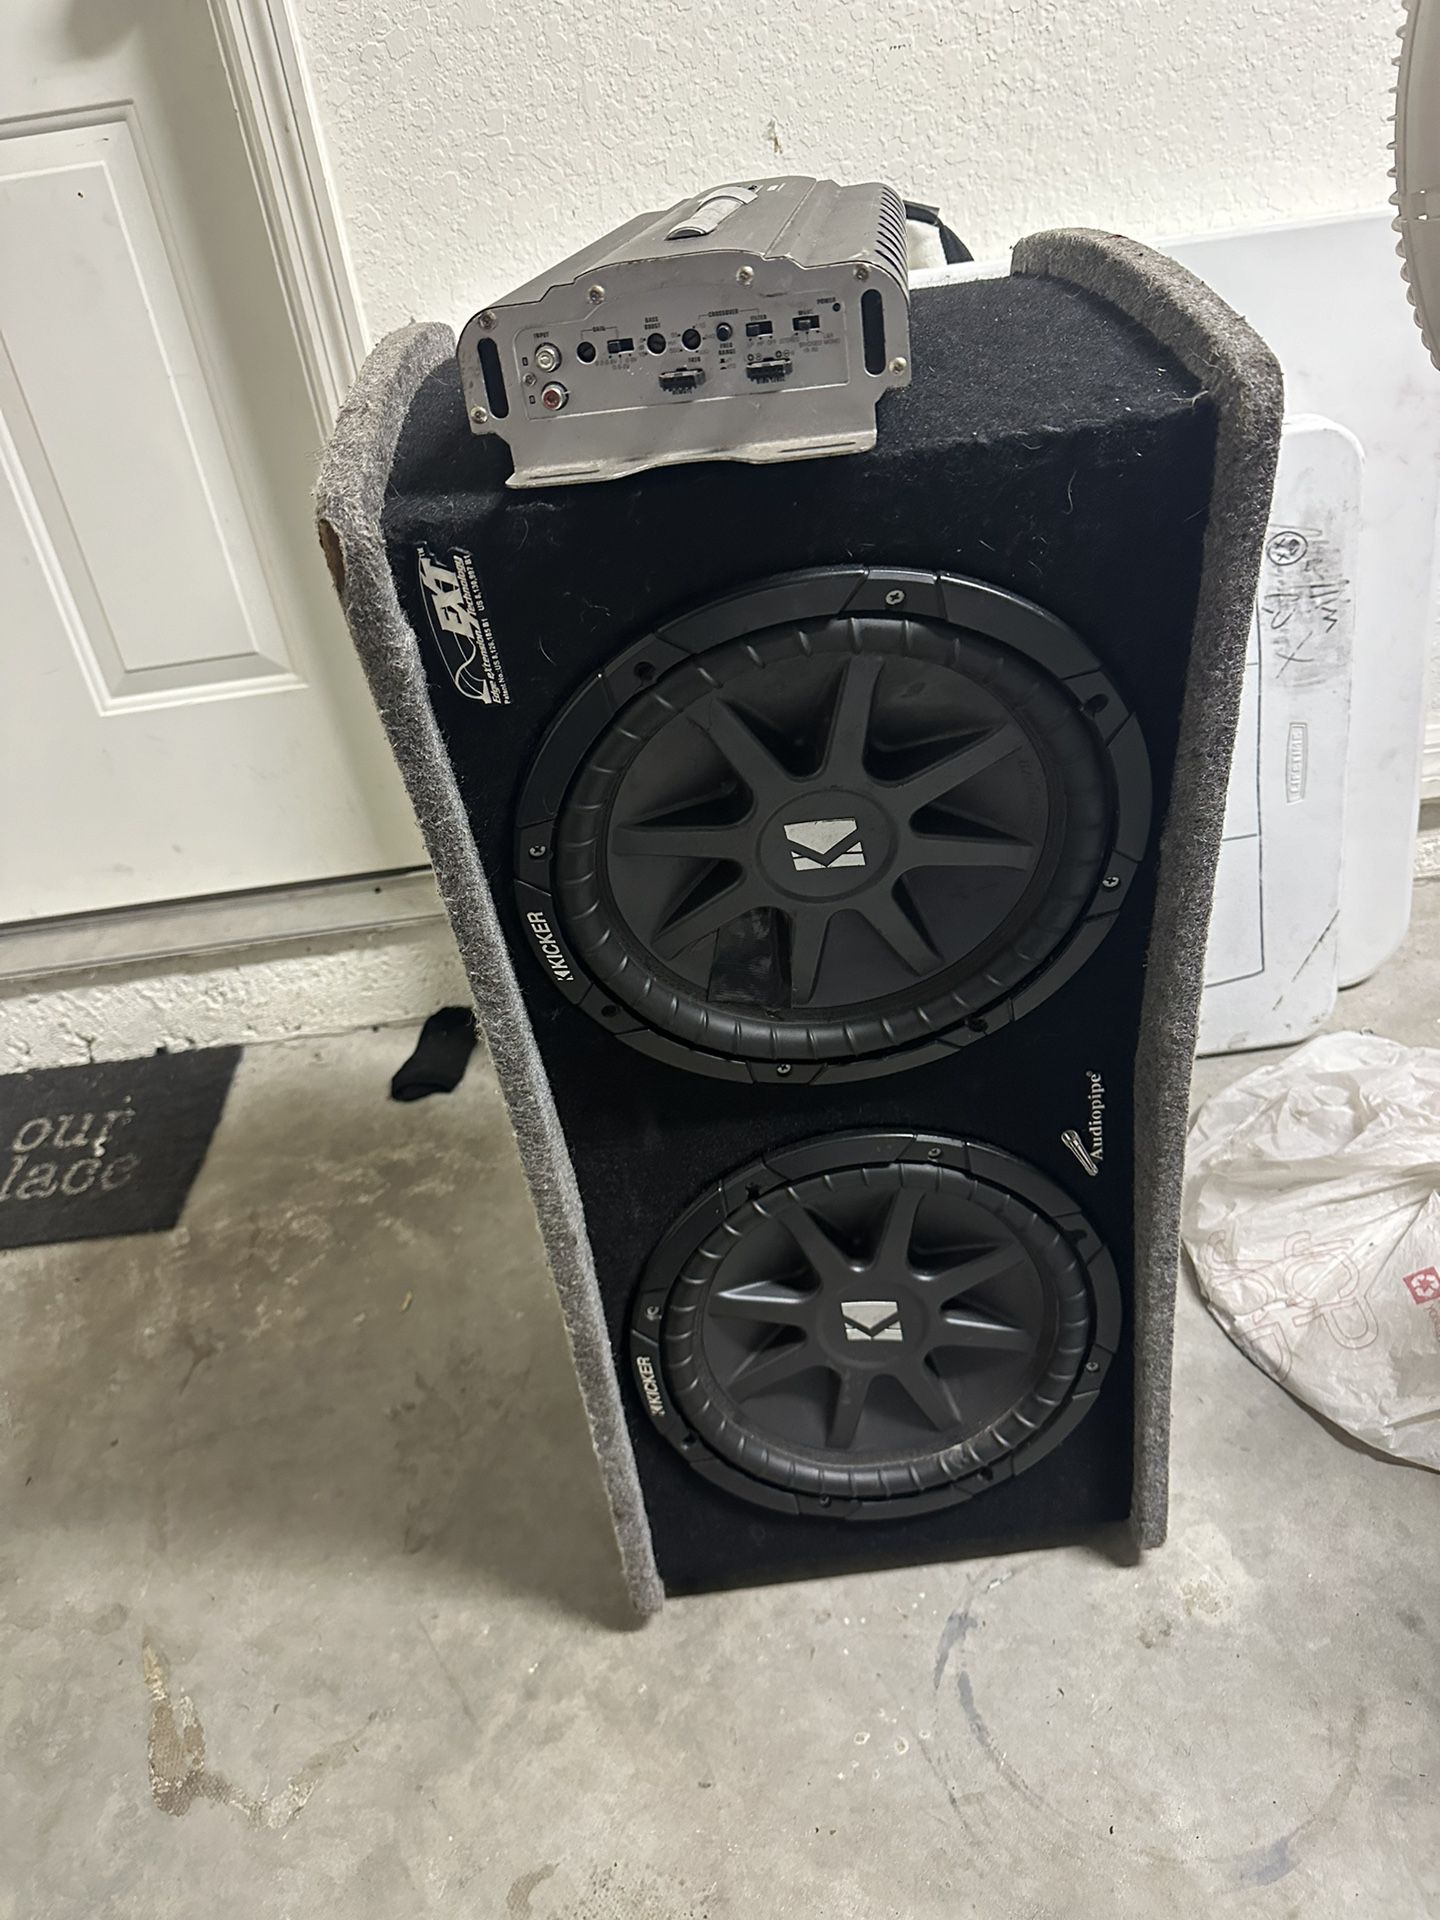 2 12” Kickers  And Amp 